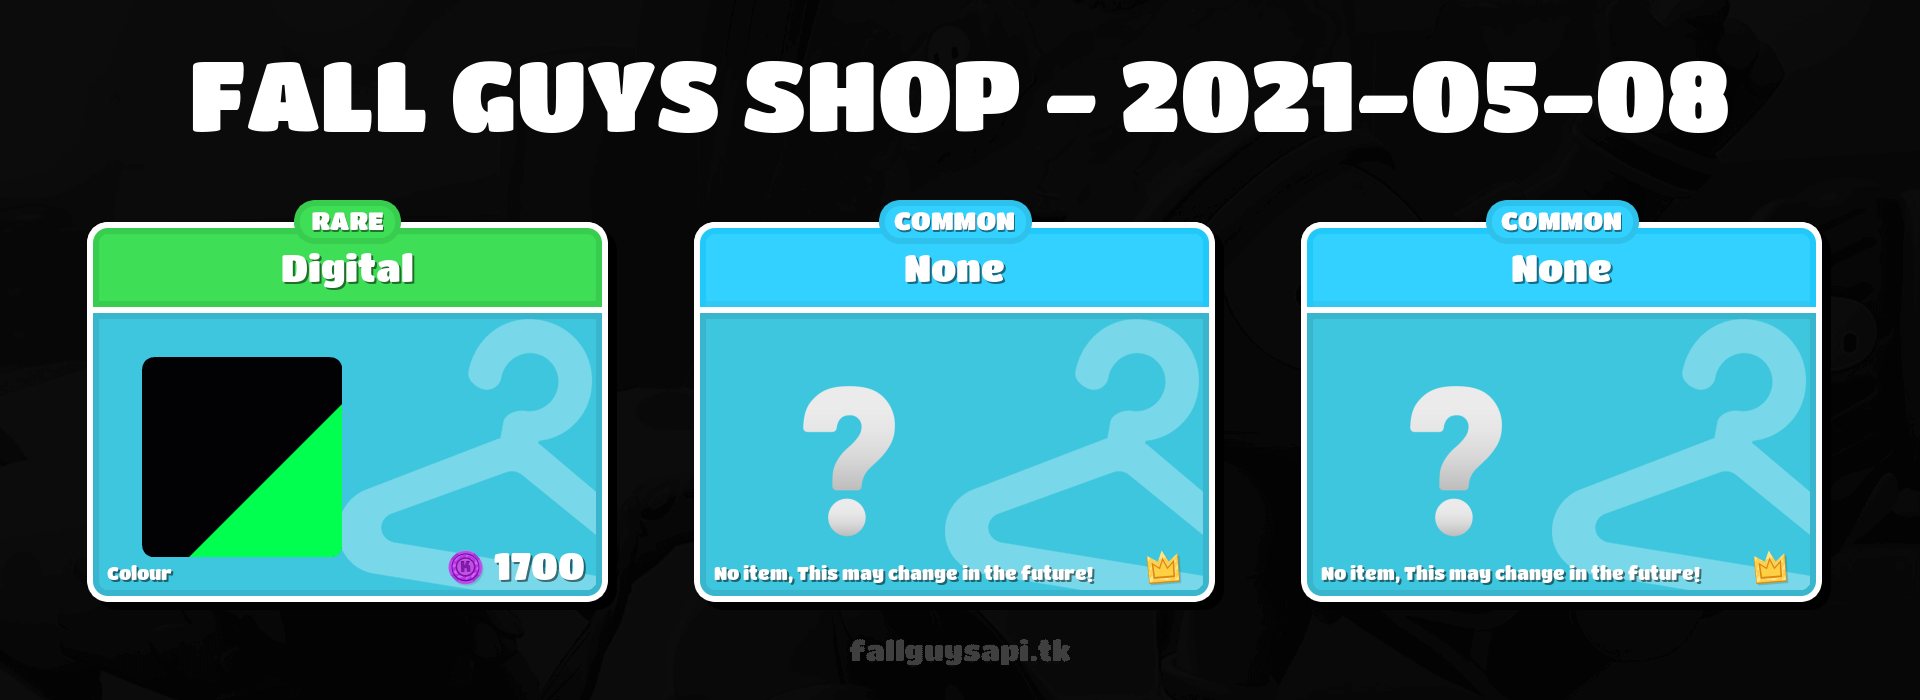 Fall Guys: Ultimate Knockout - [S4] Featured shop - What's on sale? - May 08 - May 11